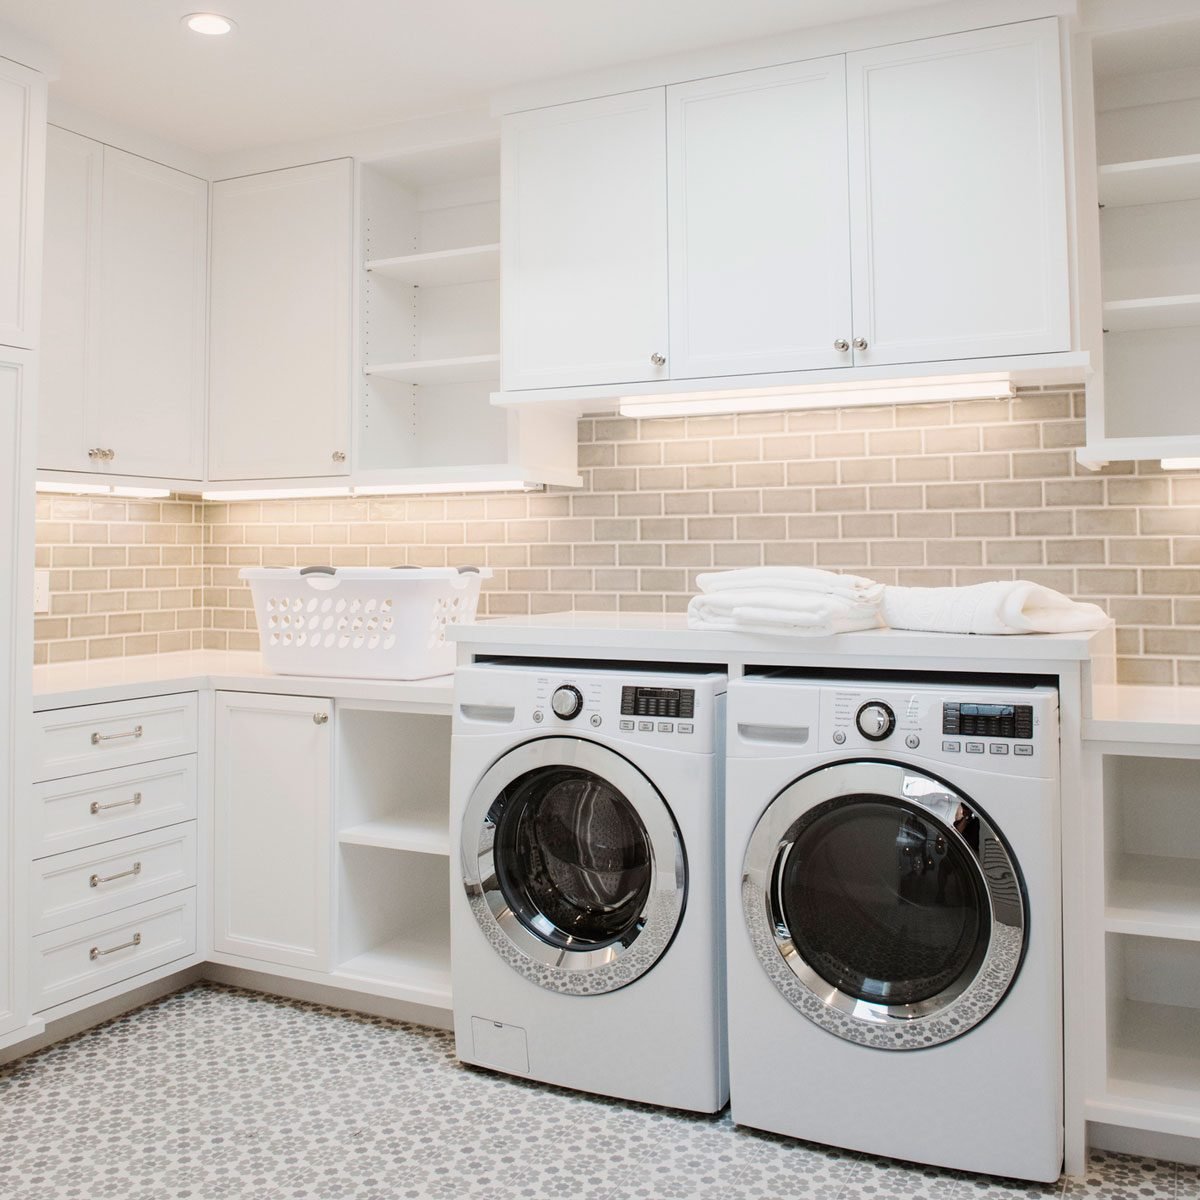 25 Laundry Room Ideas You Can Diy, How To Diy Laundry Room Cabinets